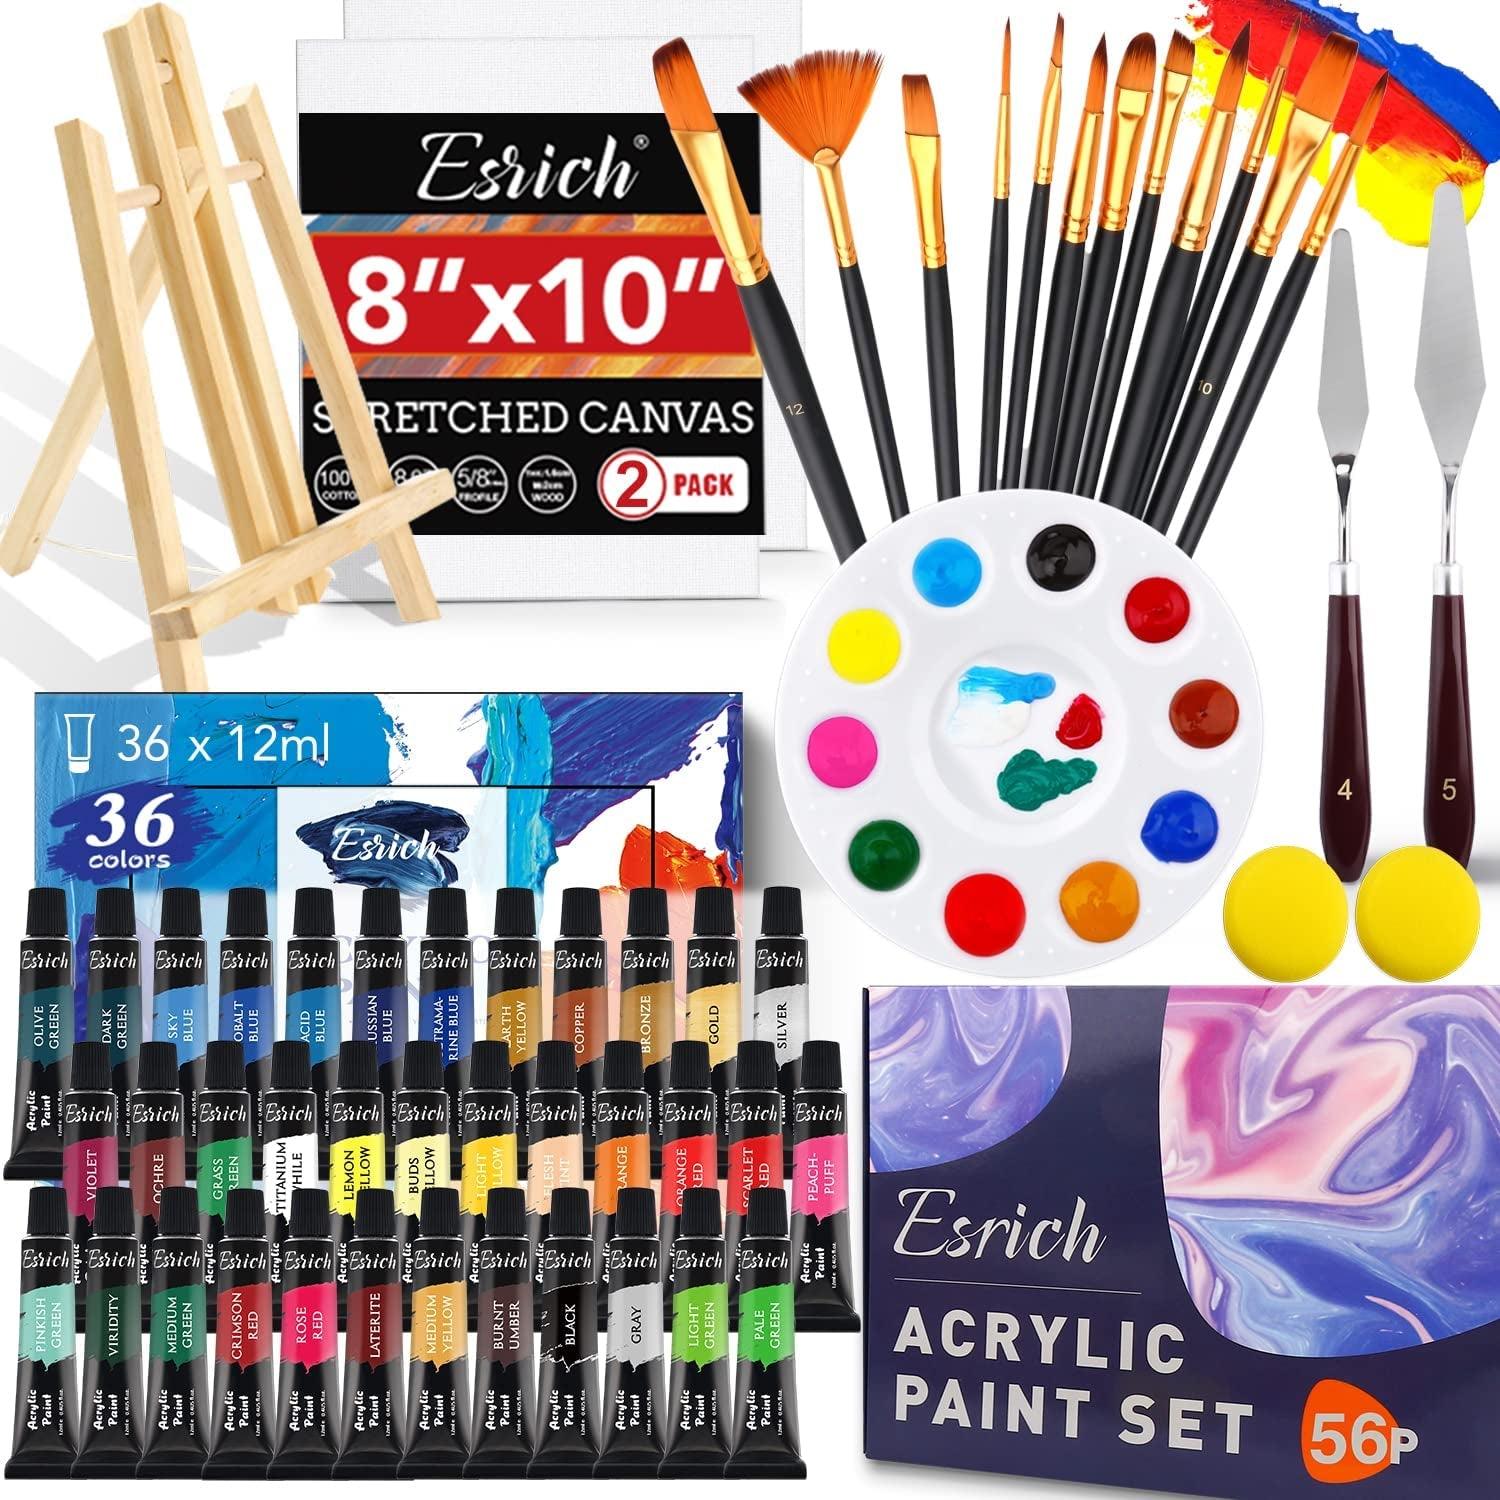 Chalkola Watercolor Paint Set for Adults, Kids, Beginner & Professional  Artists - 36 Watercolor Tubes Set (12ml, 0.4oz), 10 Painting Brushes & 1